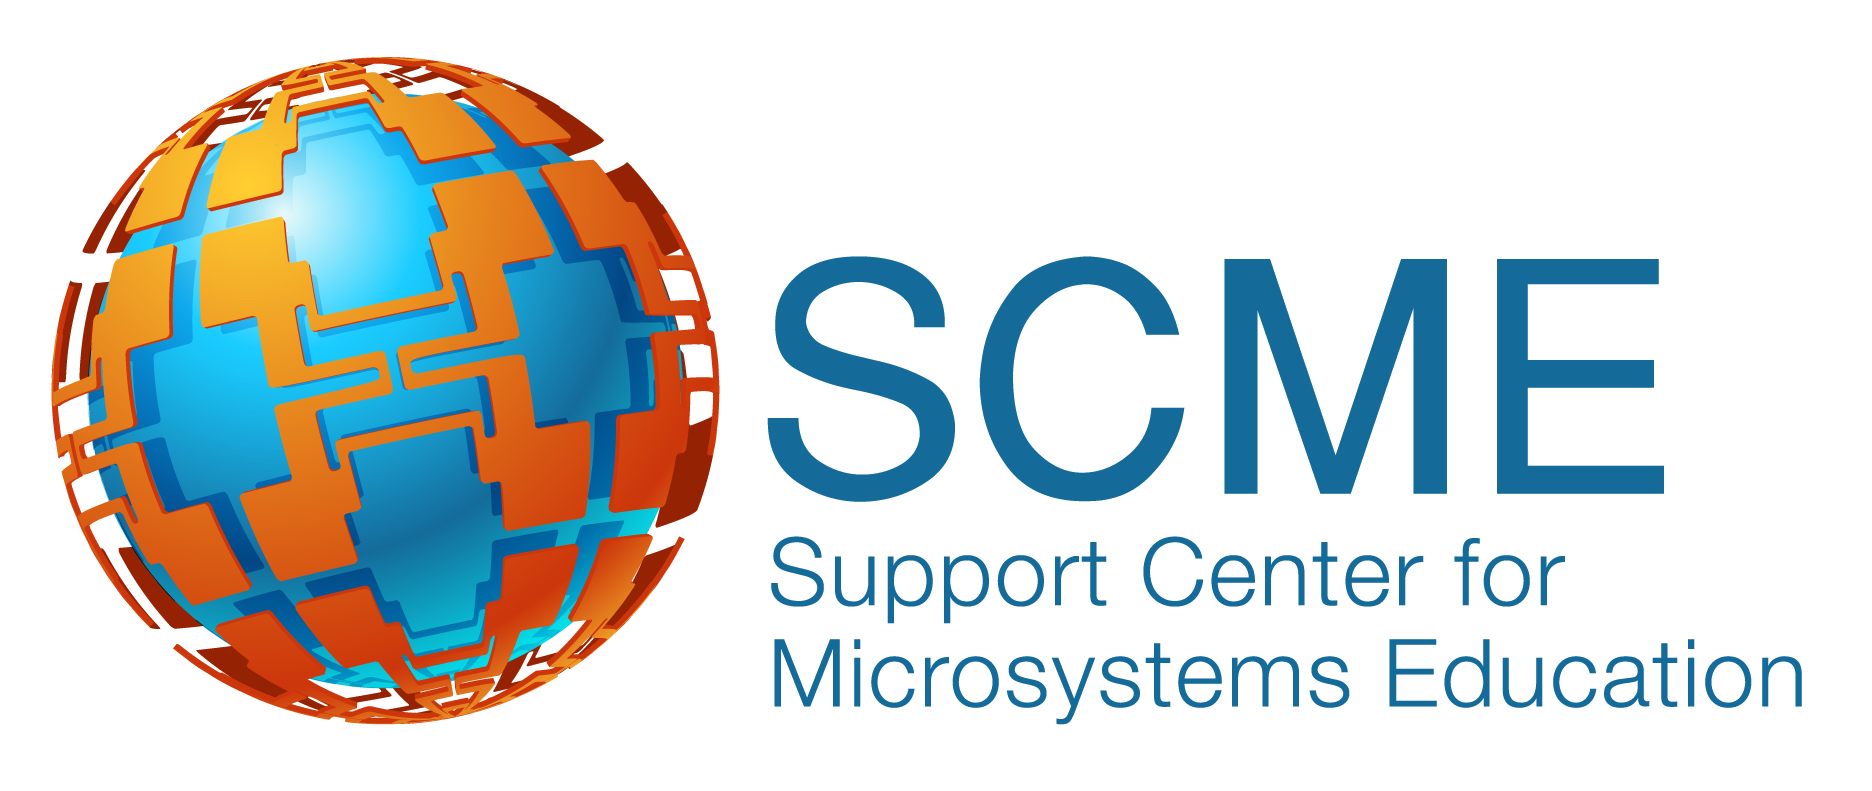 Support Center for Microsystems Education (SCME) group image